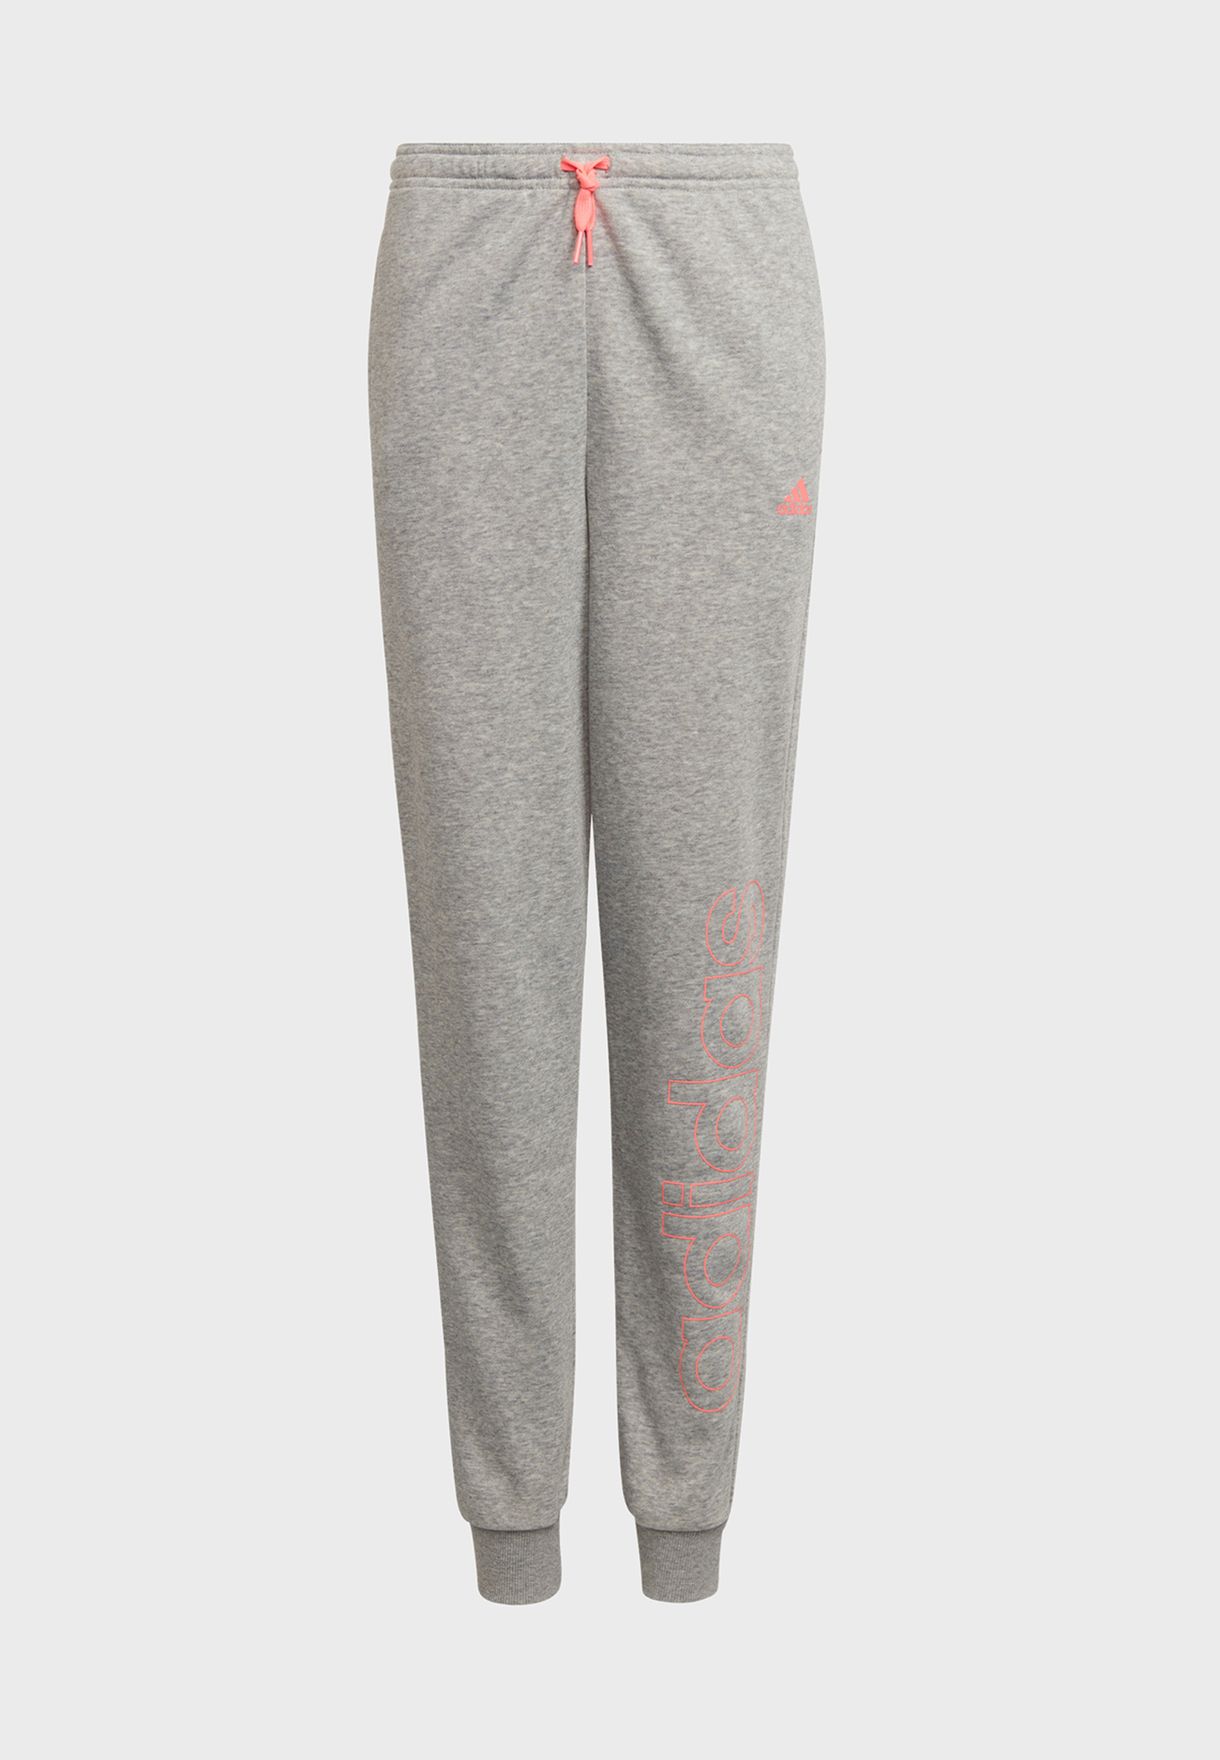 Youth Essentials French Terry Sweatpants